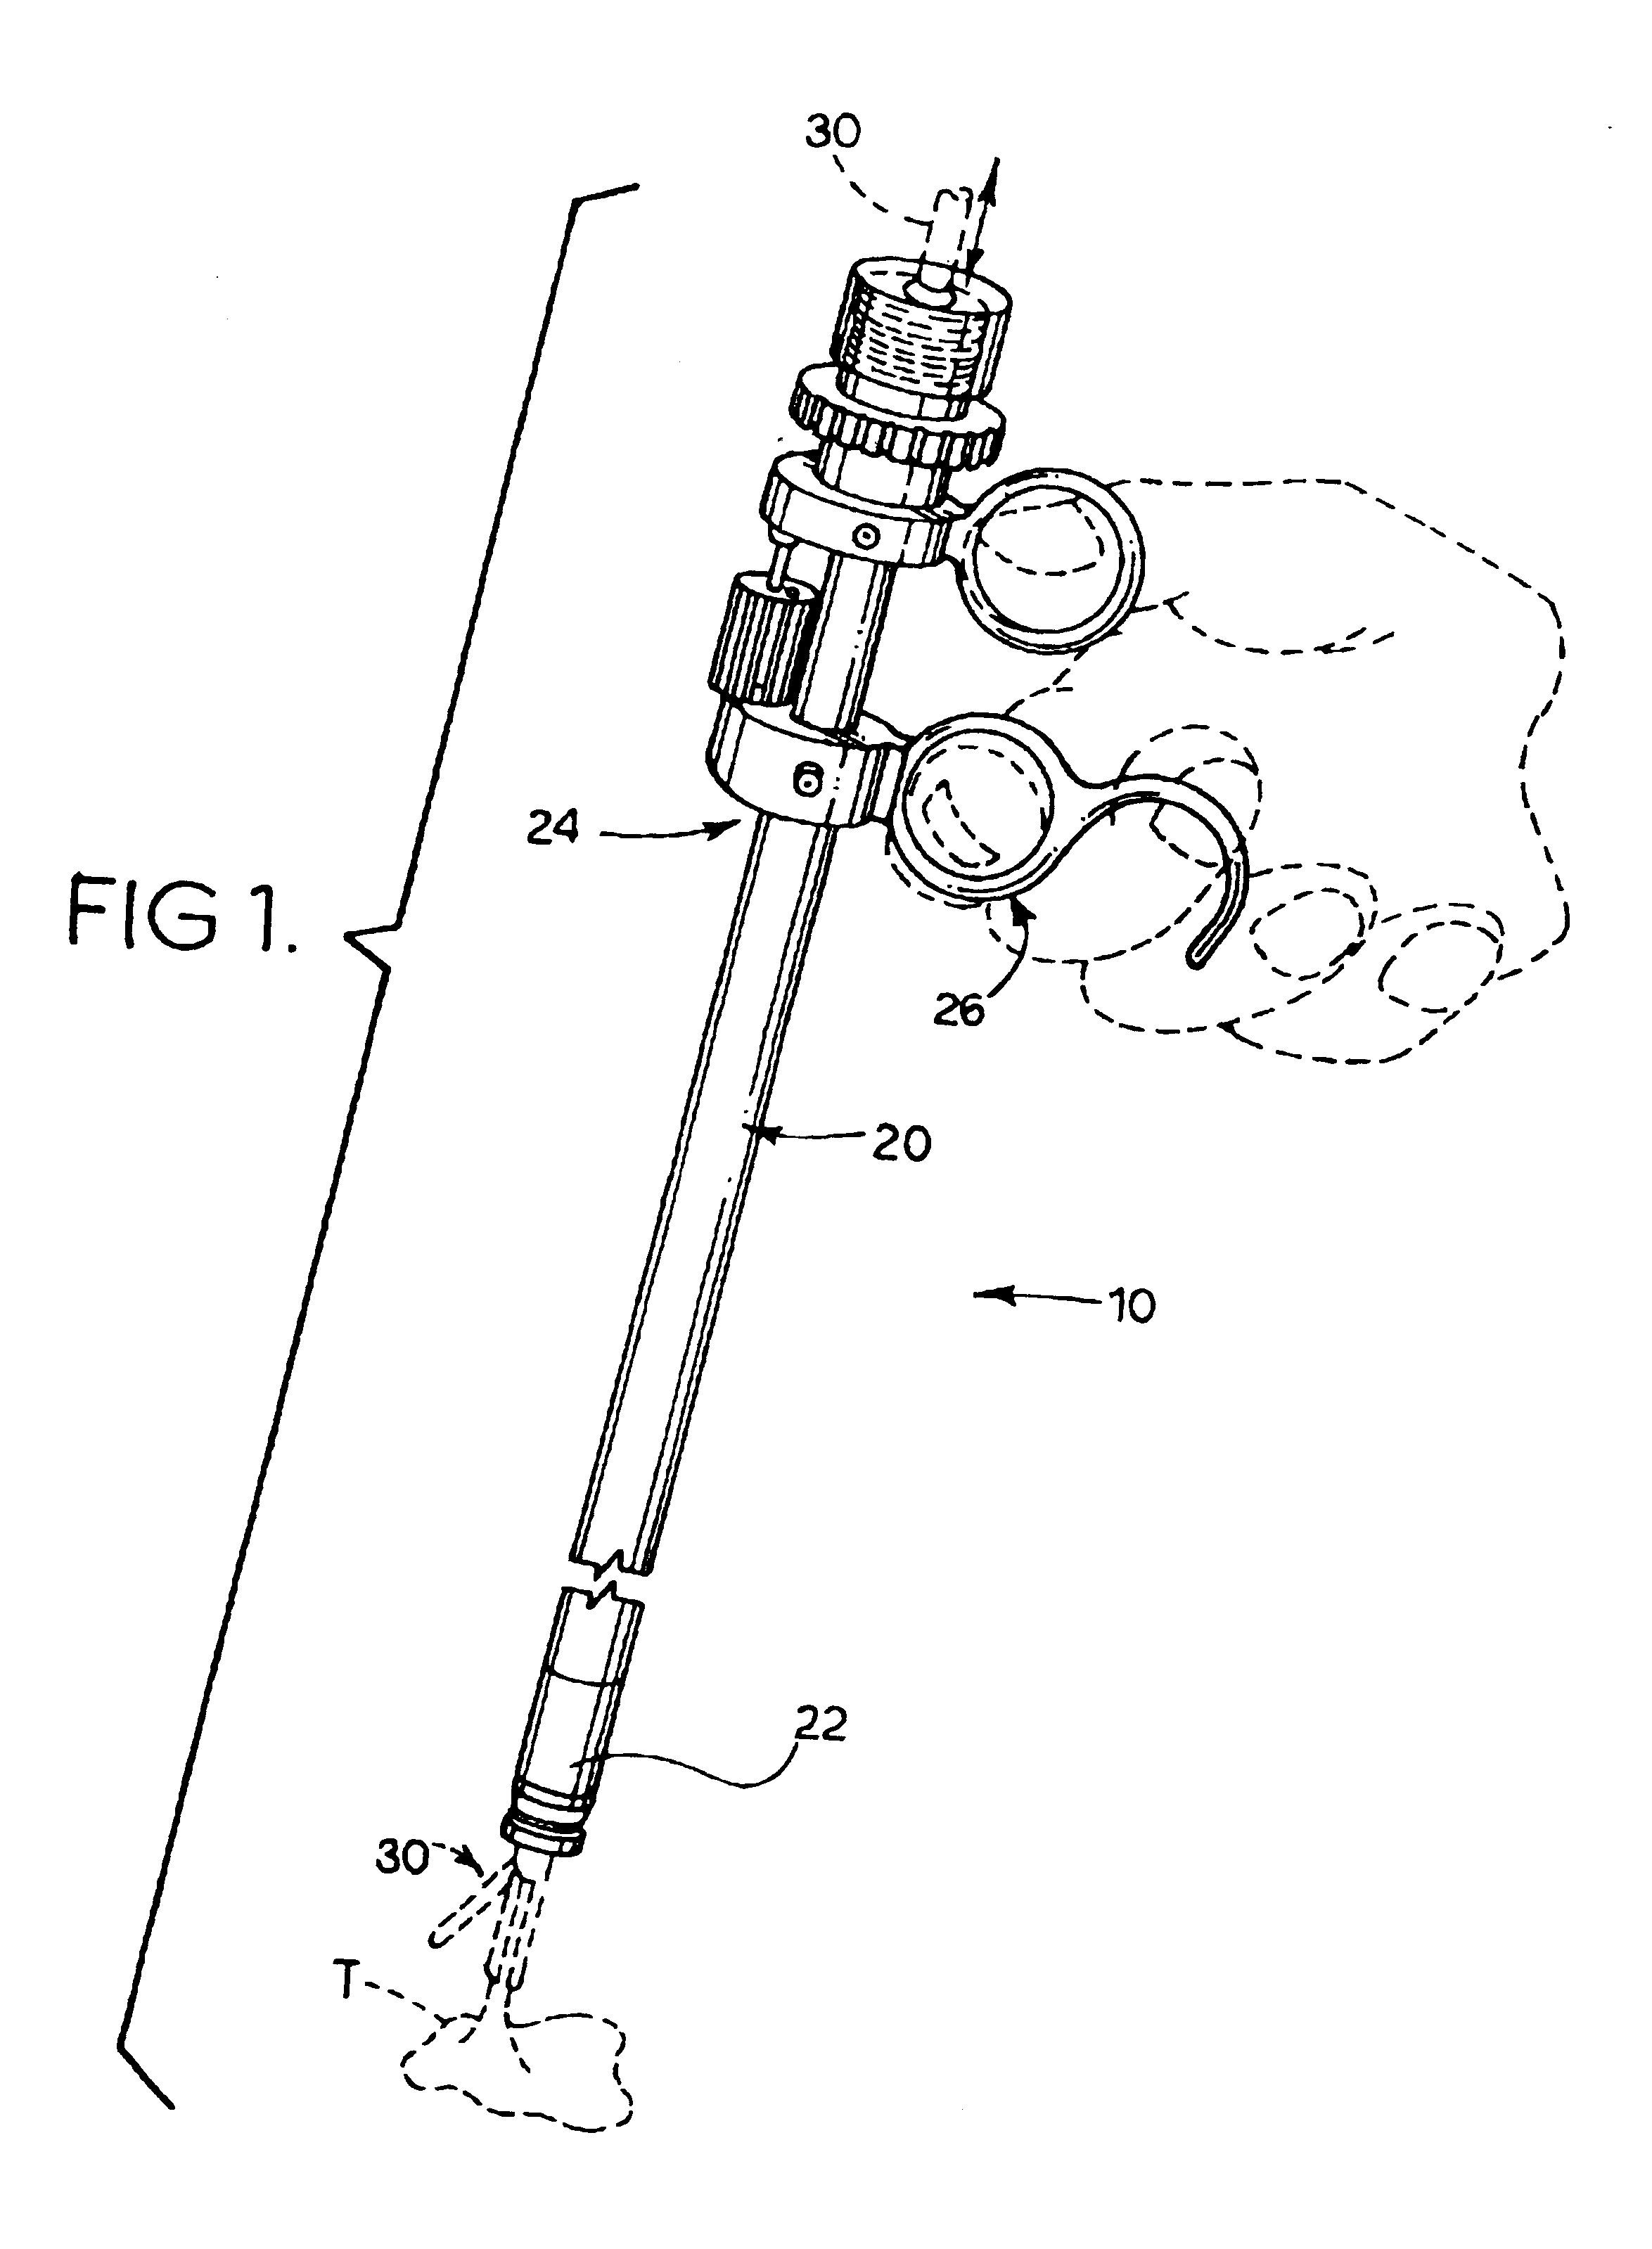 Surgical loop delivery device